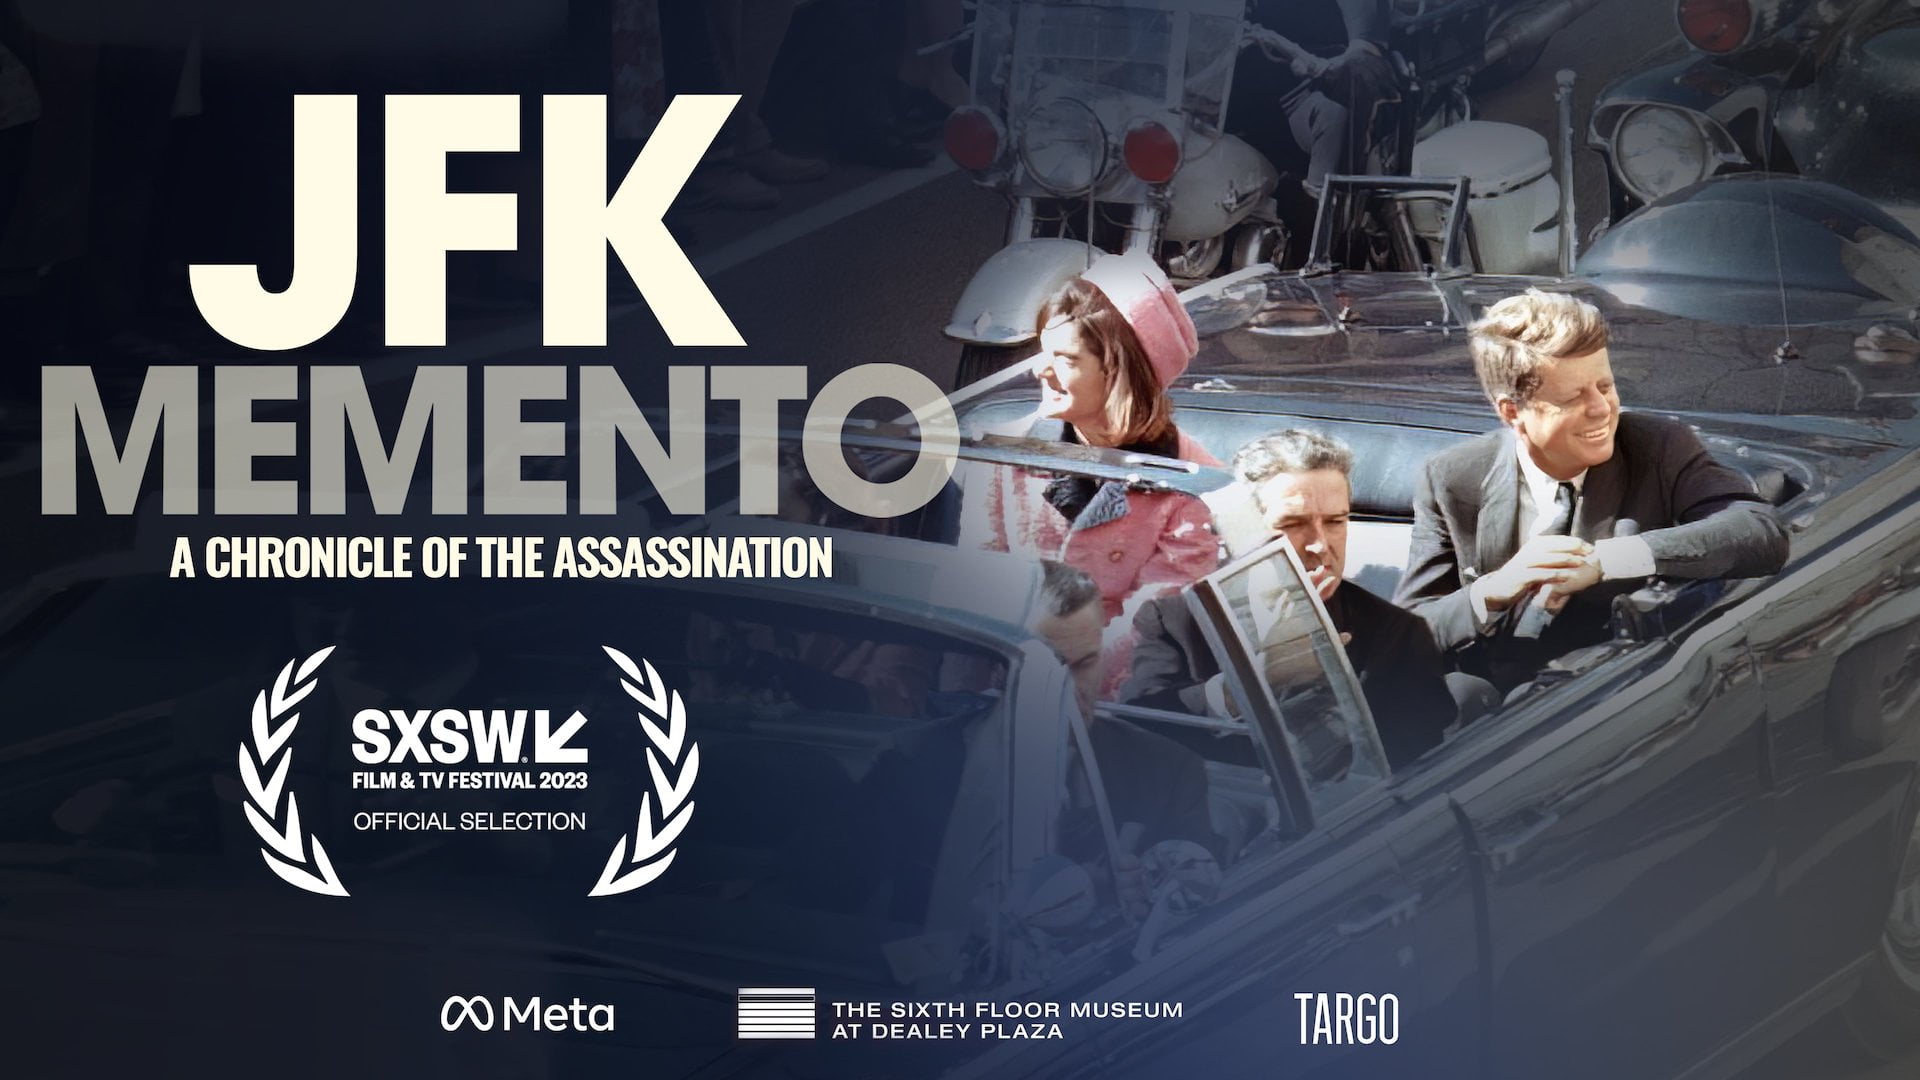 The assassination of JFK gains another dimension in Meta's new VR documentary